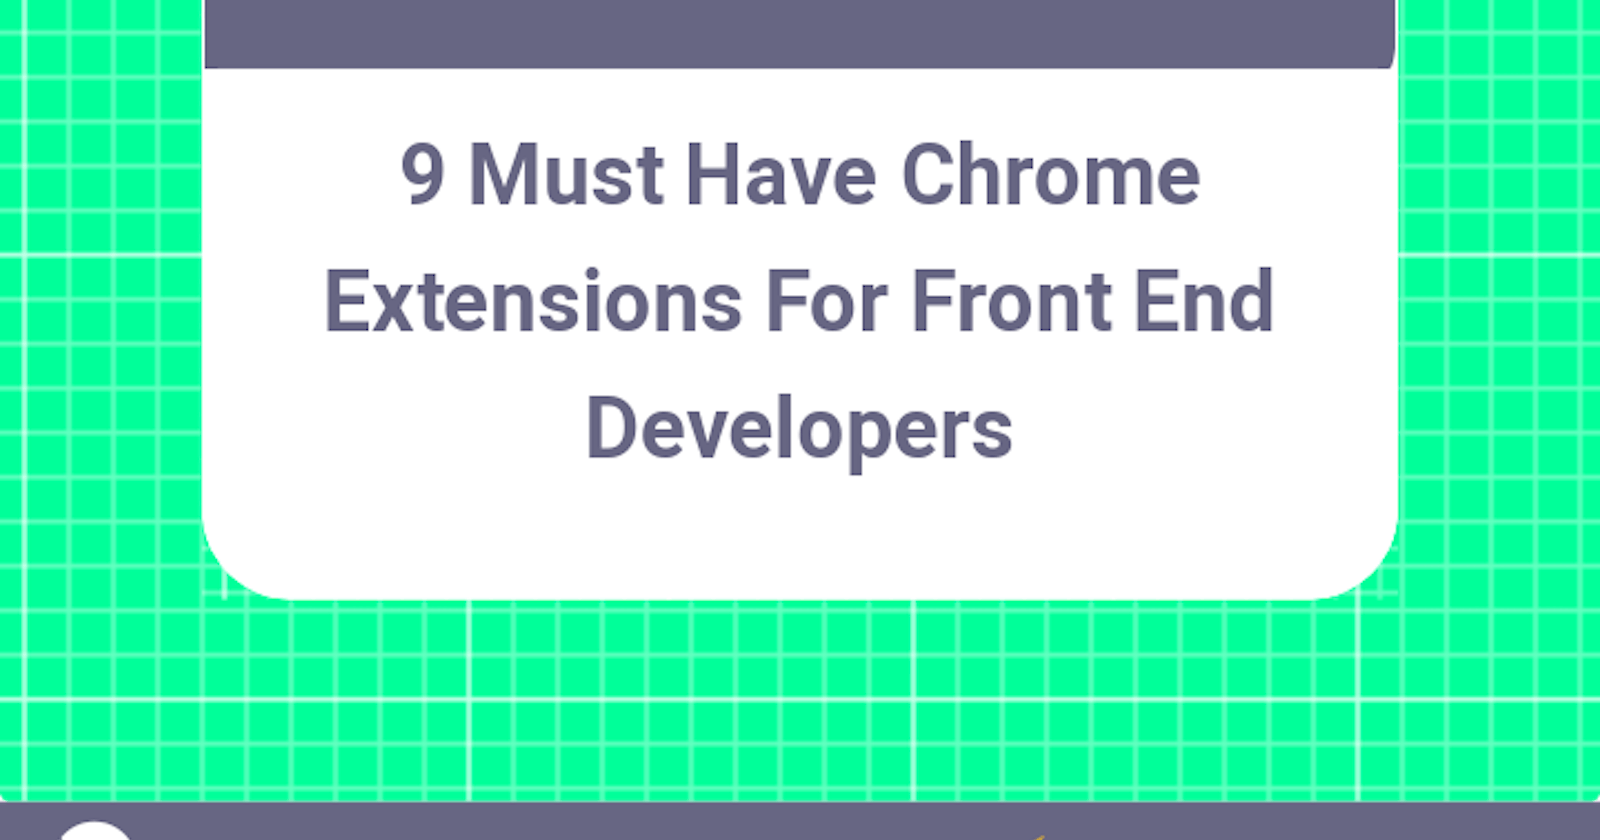 9 Must Have Chrome Extensions For Front End Developers.